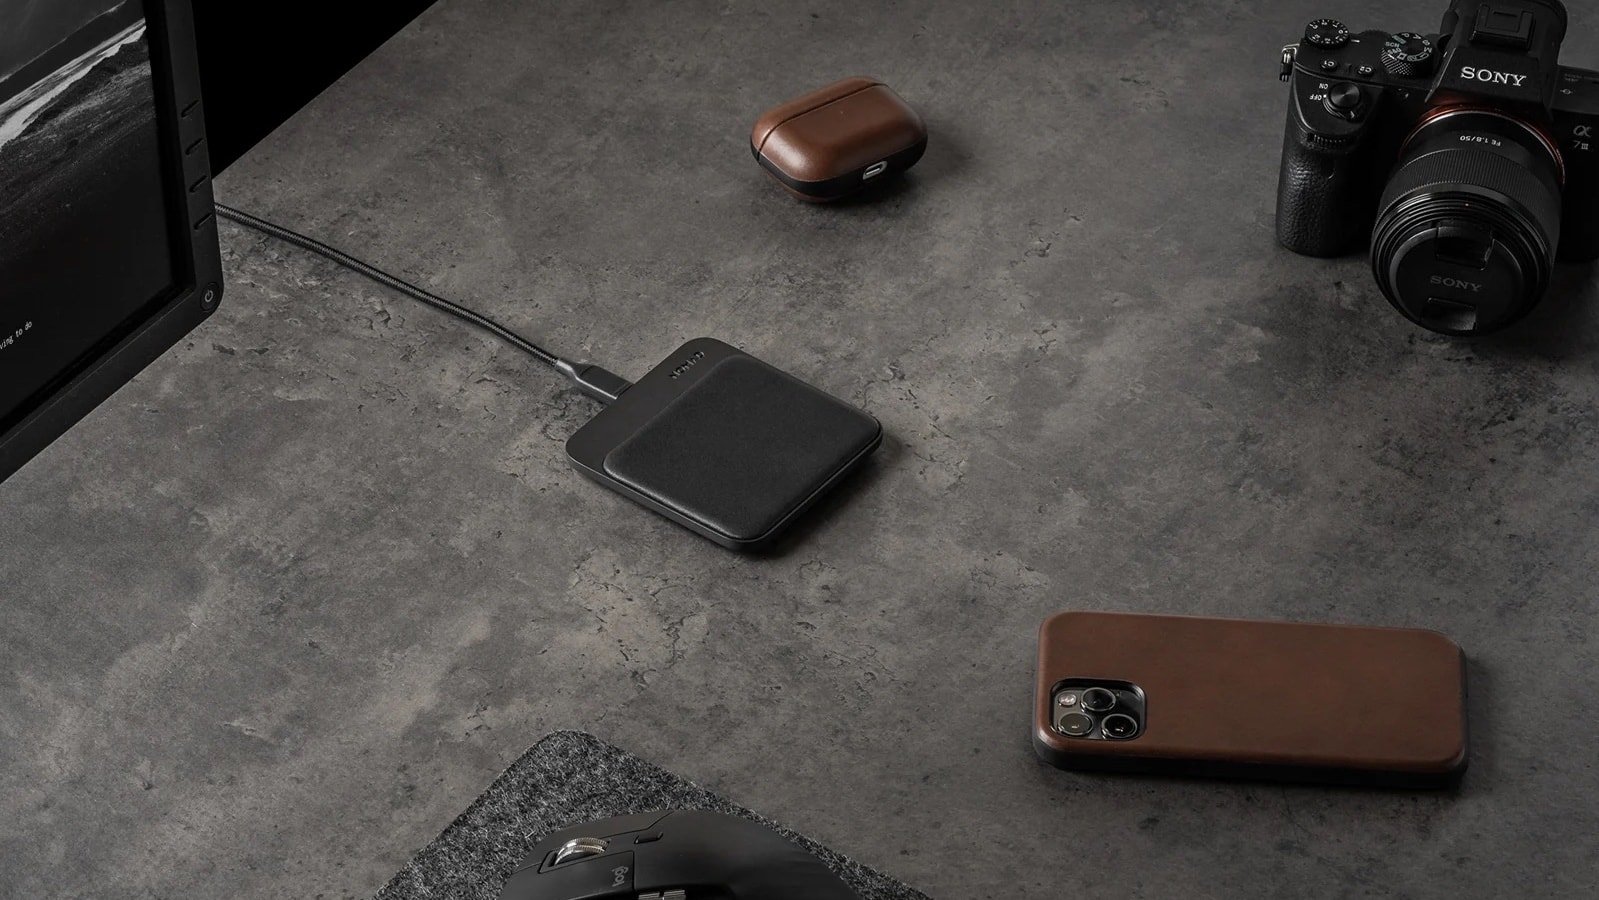 Nomad Base Station Mini full-surface wireless charger uses a 15-watt transmitter coil